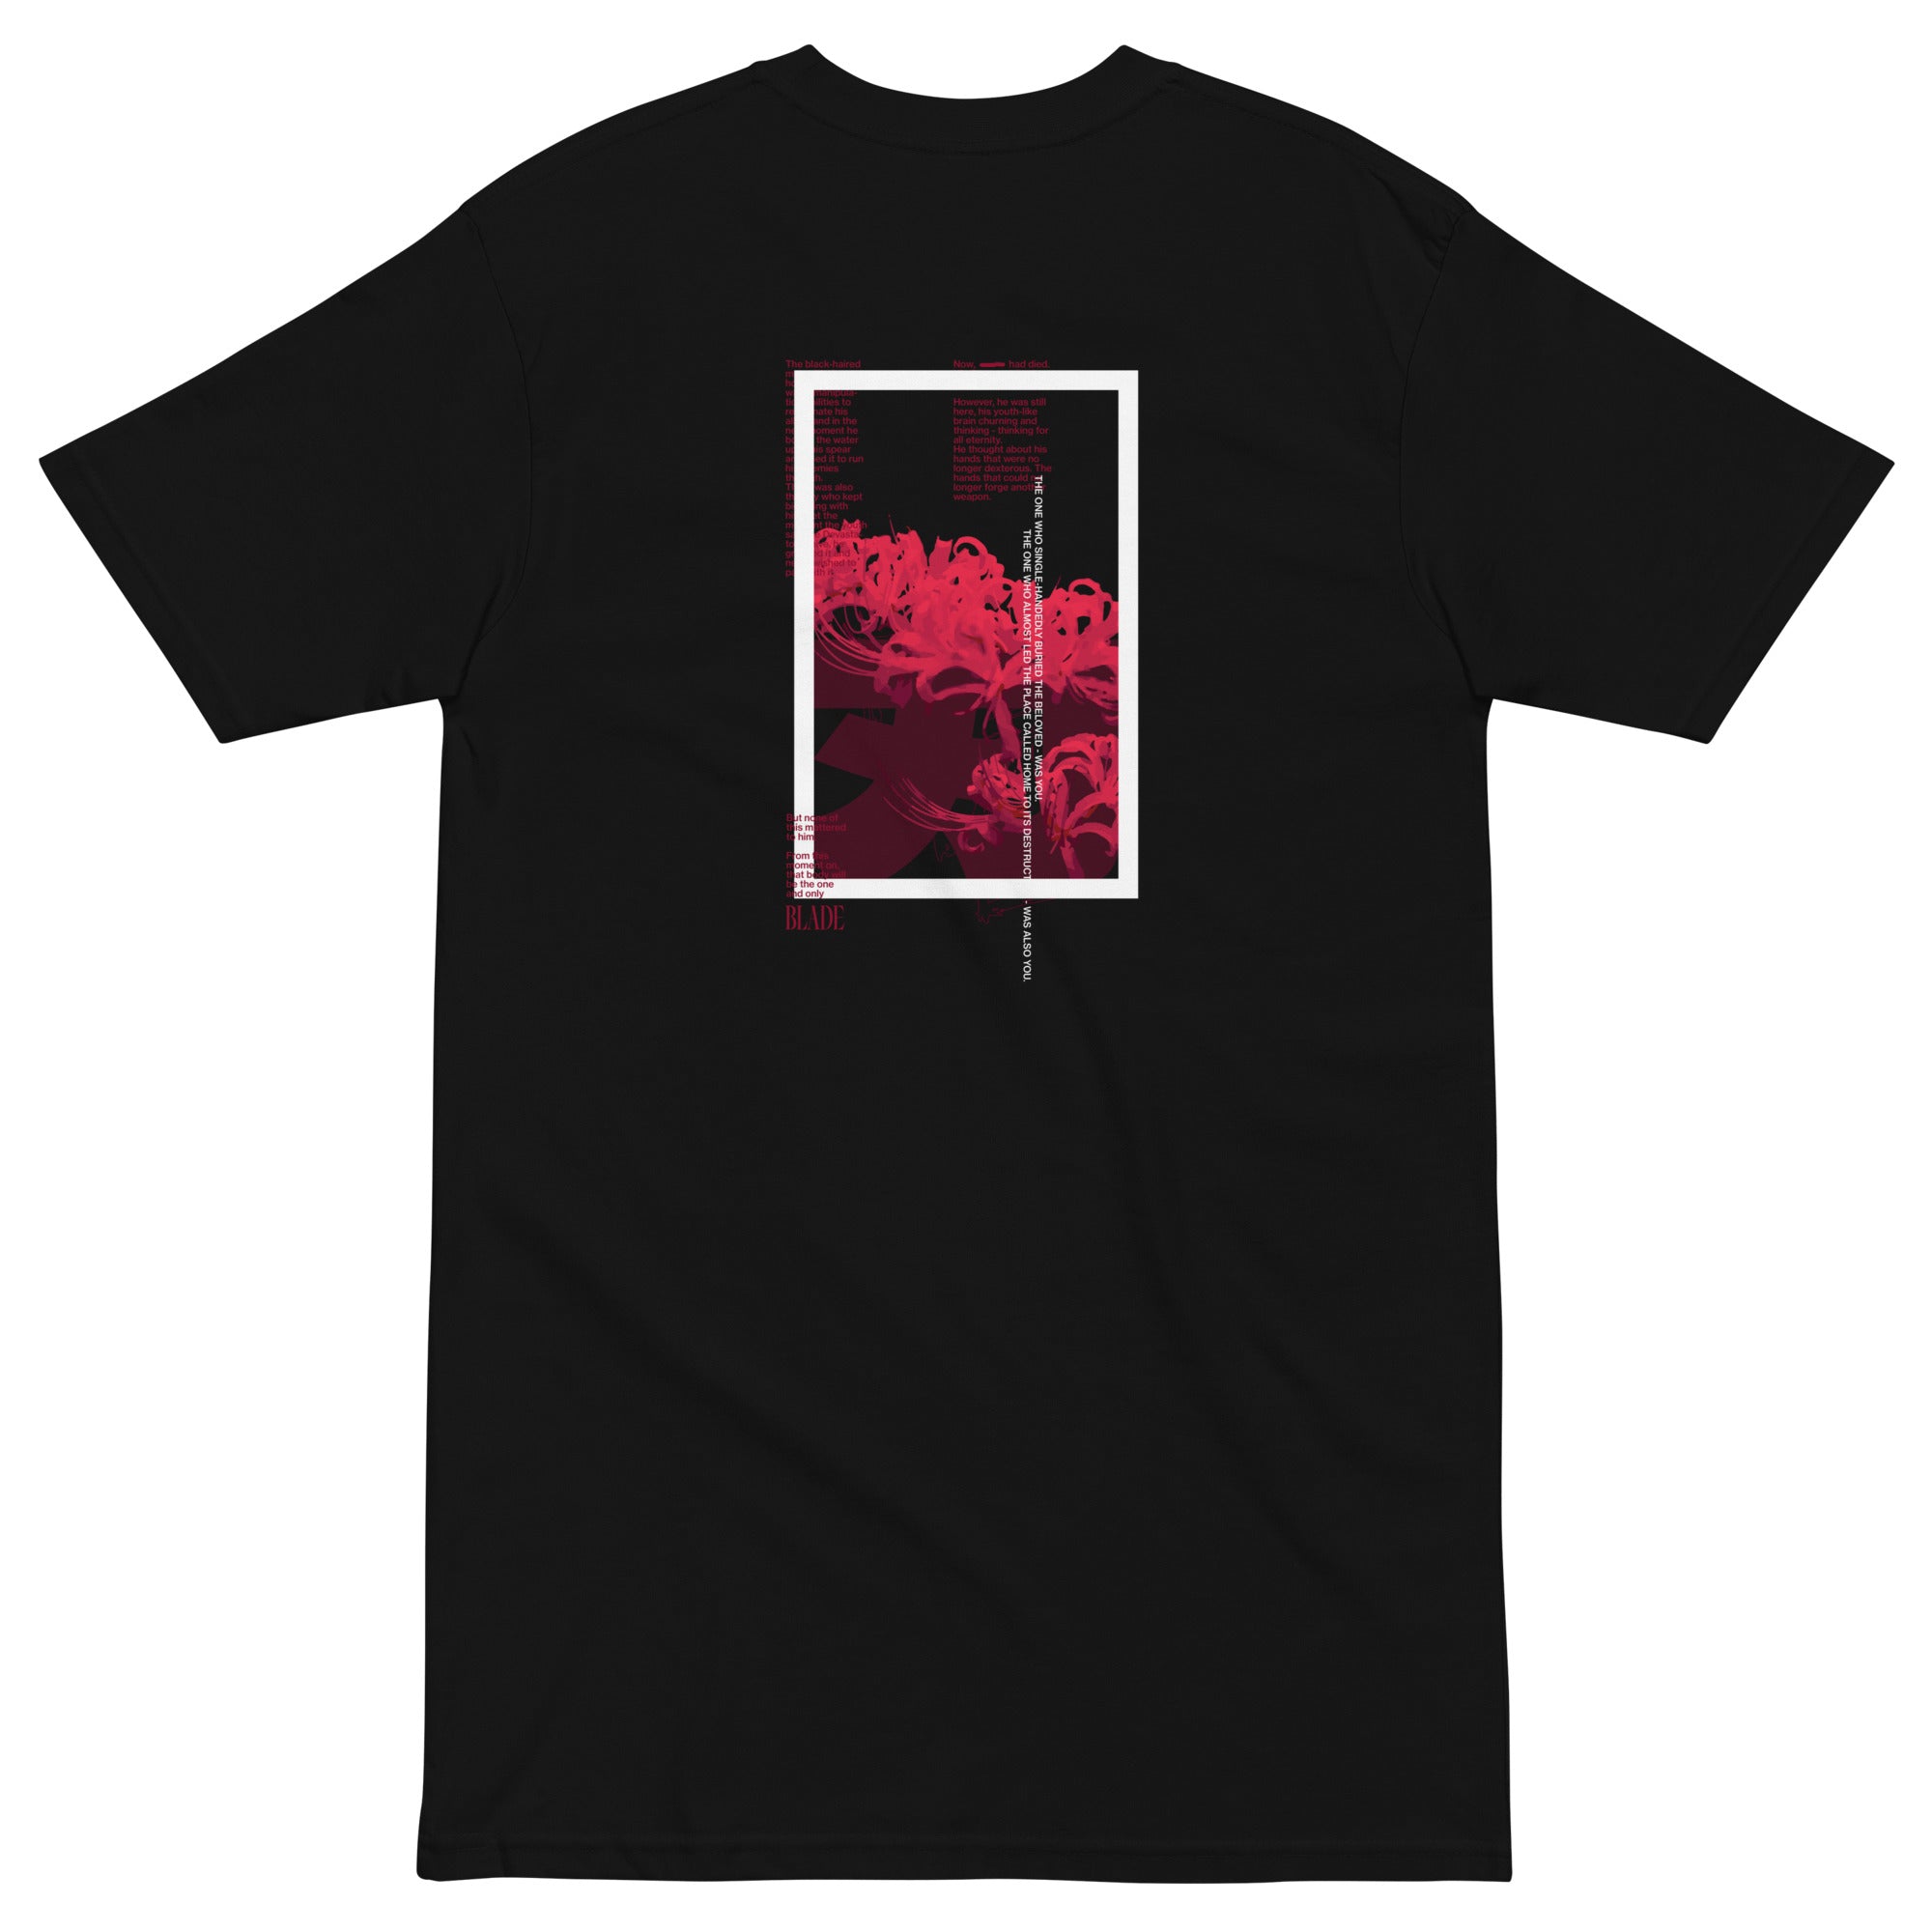 I MUST HAVE DIED • t-shirt - Jackler - anime-inspired streetwear - anime clothing